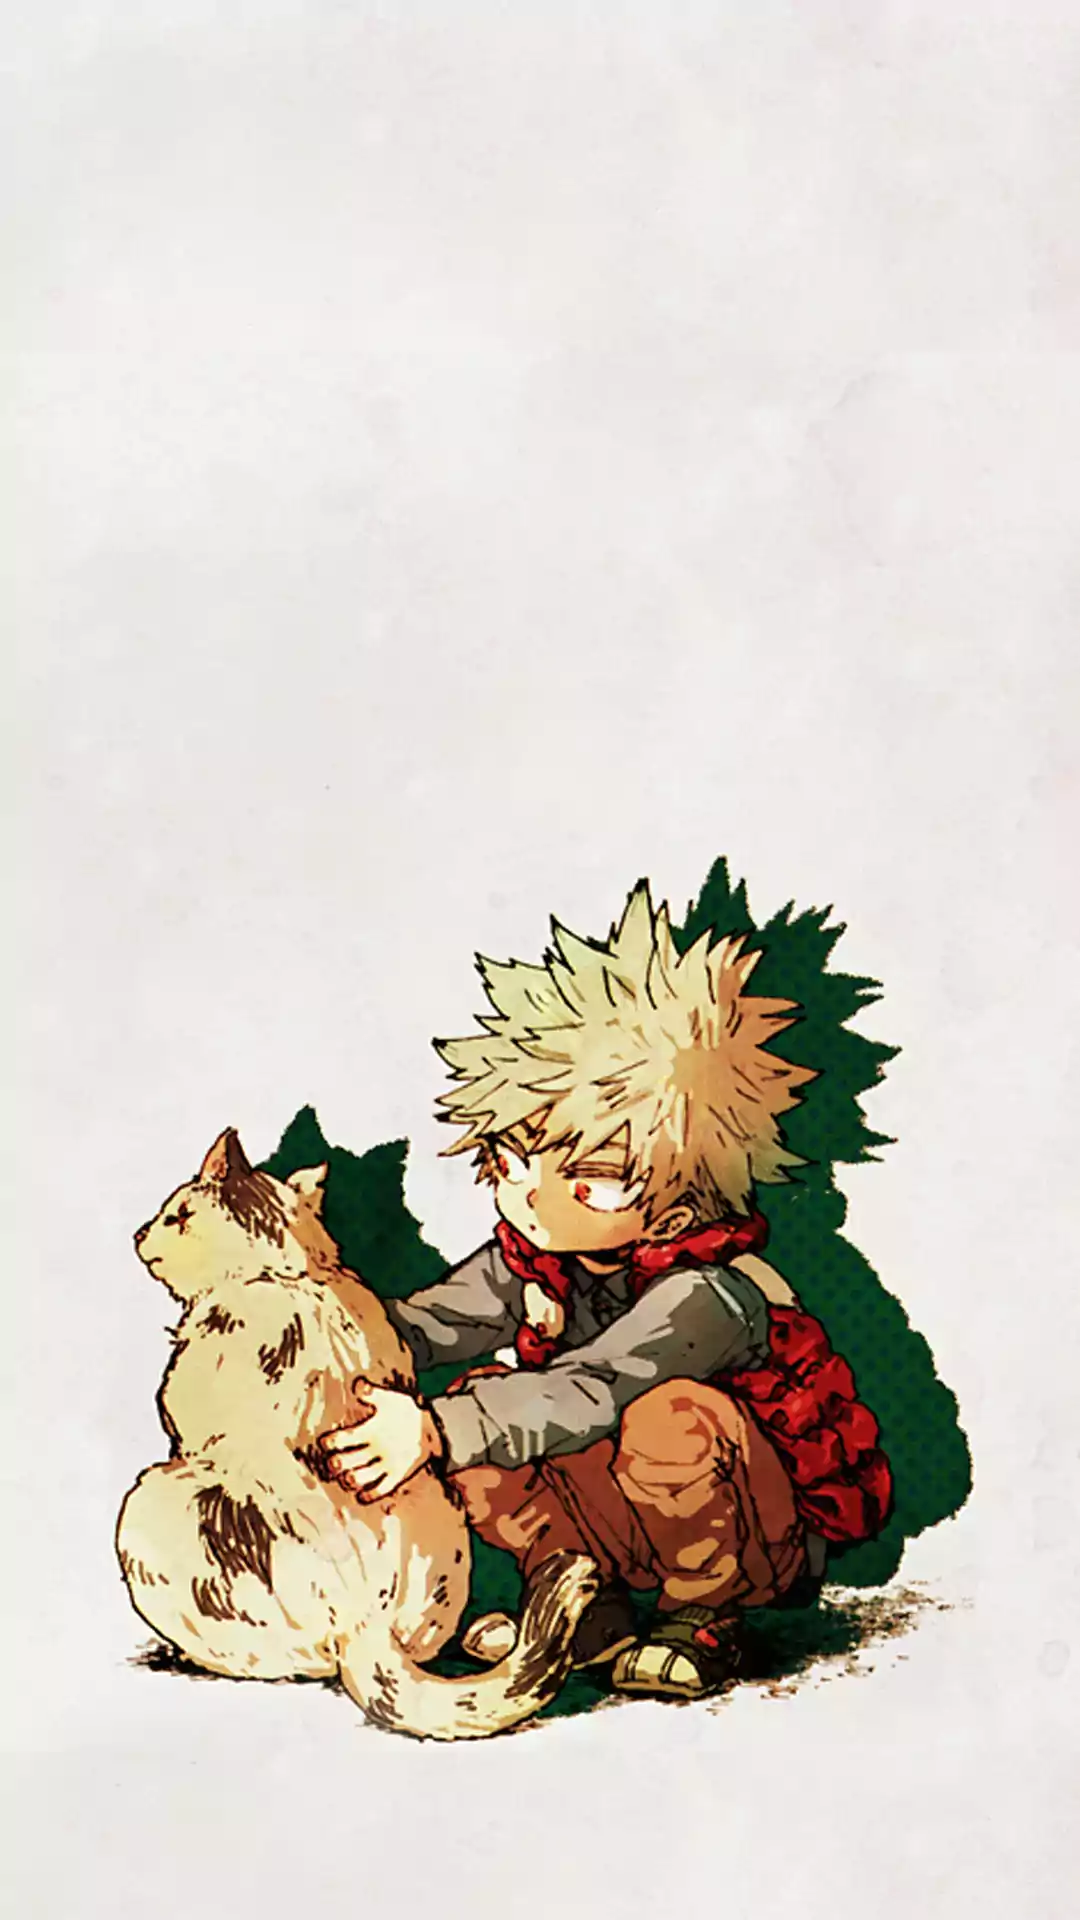 My Hero Academia iPhone Wallpaper with high-resolution 1080x1920 pixel. You can use this wallpaper for your iPhone 5, 6, 7, 8, X, XS, XR backgrounds, Mobile Screensaver, or iPad Lock Screen - Bakugo